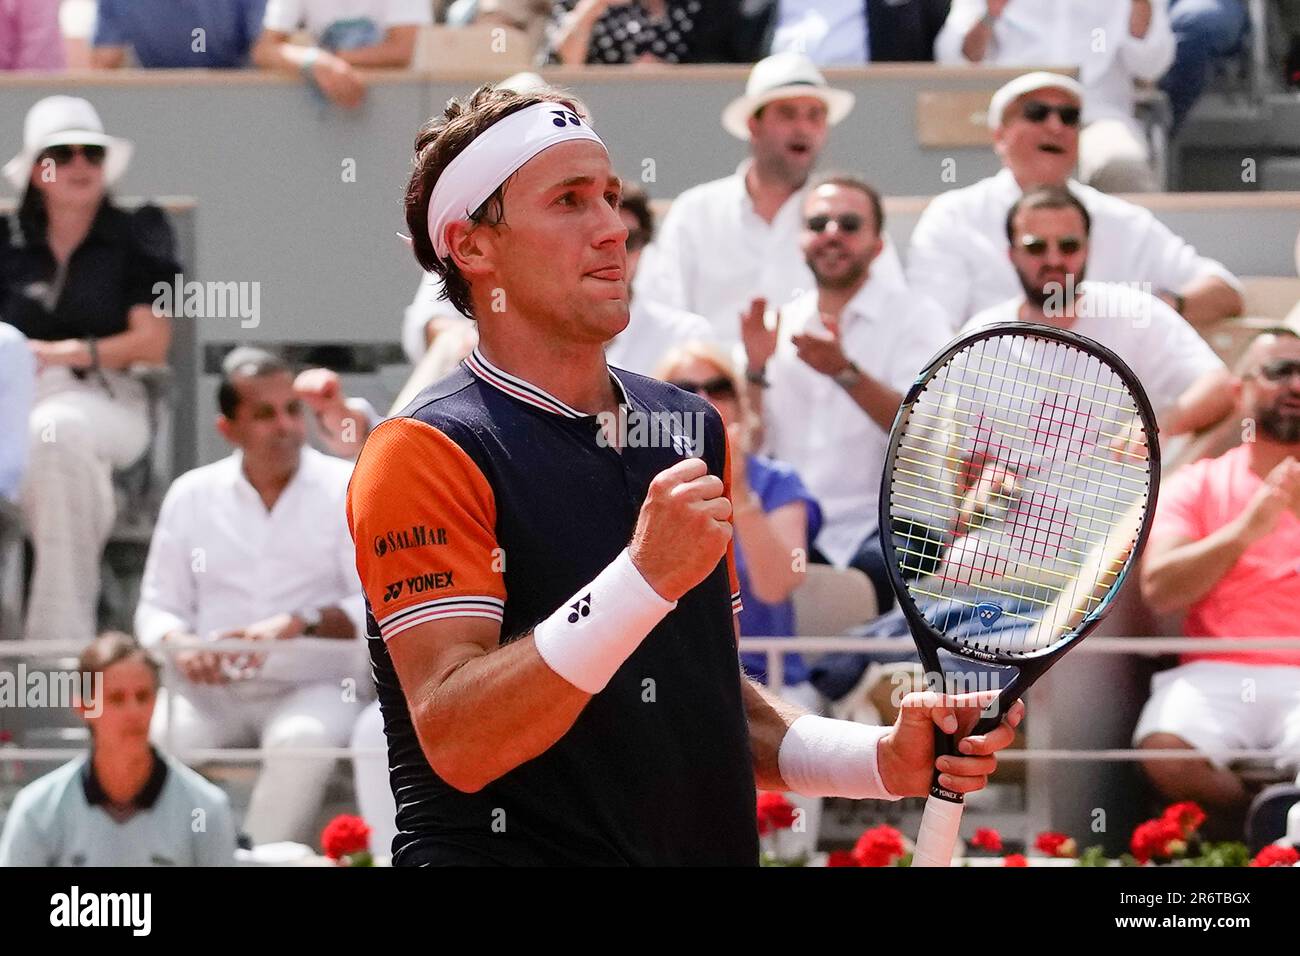 Norway's Casper Ruud clenches his fist after scoring a point against  Serbia's Novak Djokovic during the men's singles final match of the French  Open tennis tournament at the Roland Garros stadium in